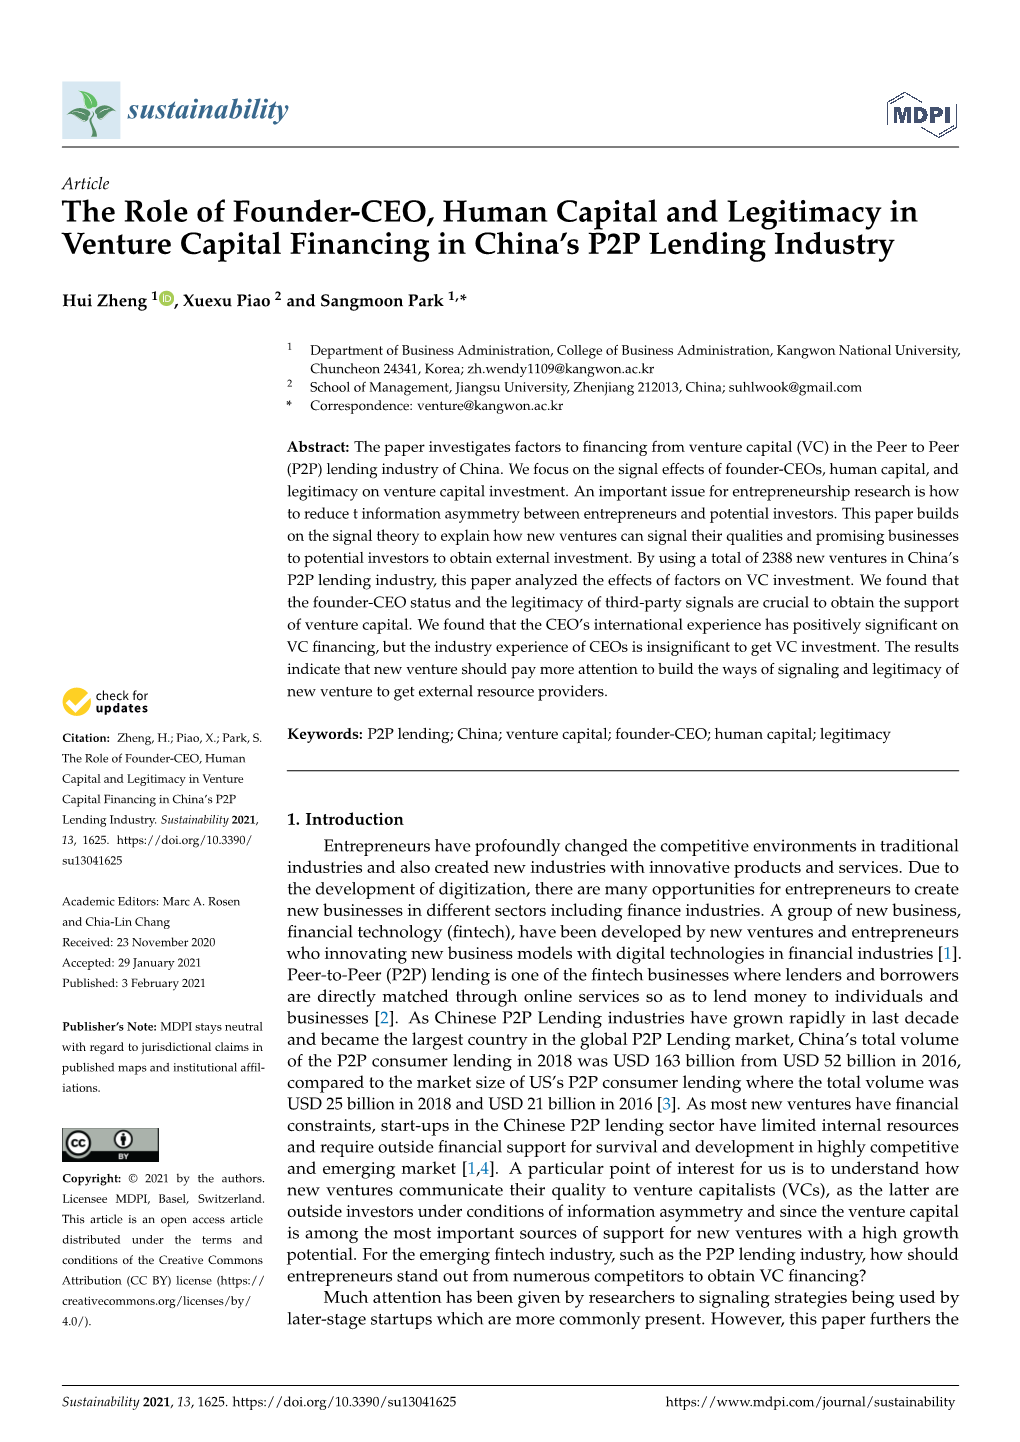 The Role of Founder-CEO, Human Capital and Legitimacy in Venture Capital Financing in China’S P2P Lending Industry